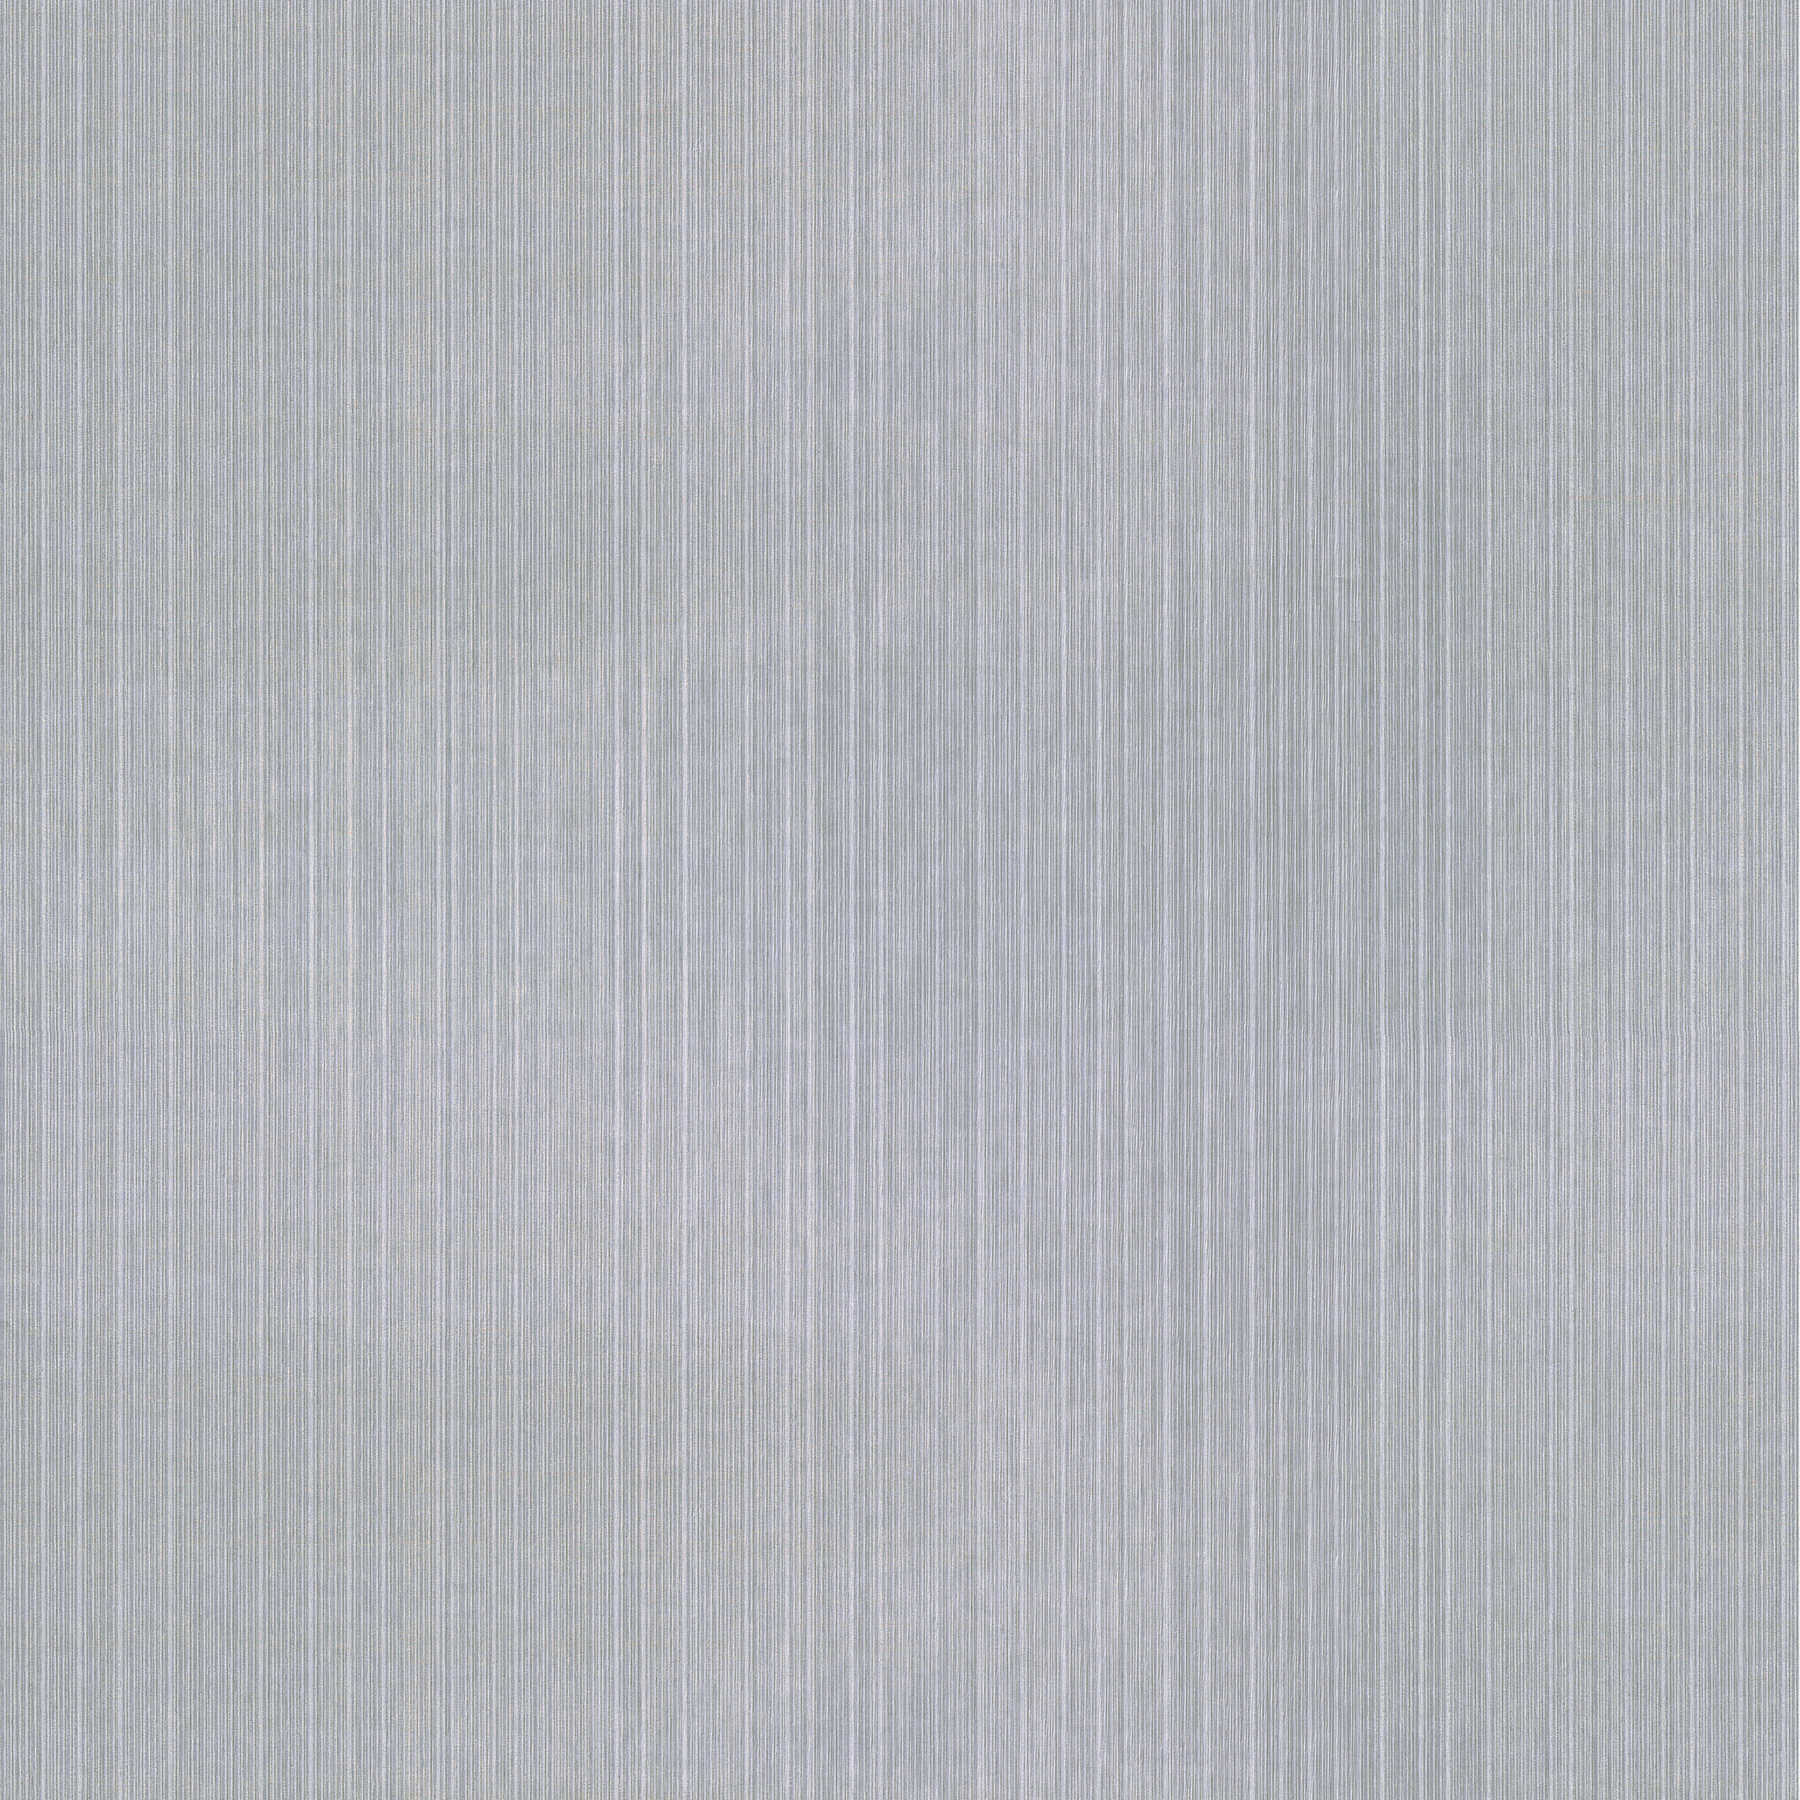         Mottled non-woven wallpaper with metallic accents - silver, grey
    